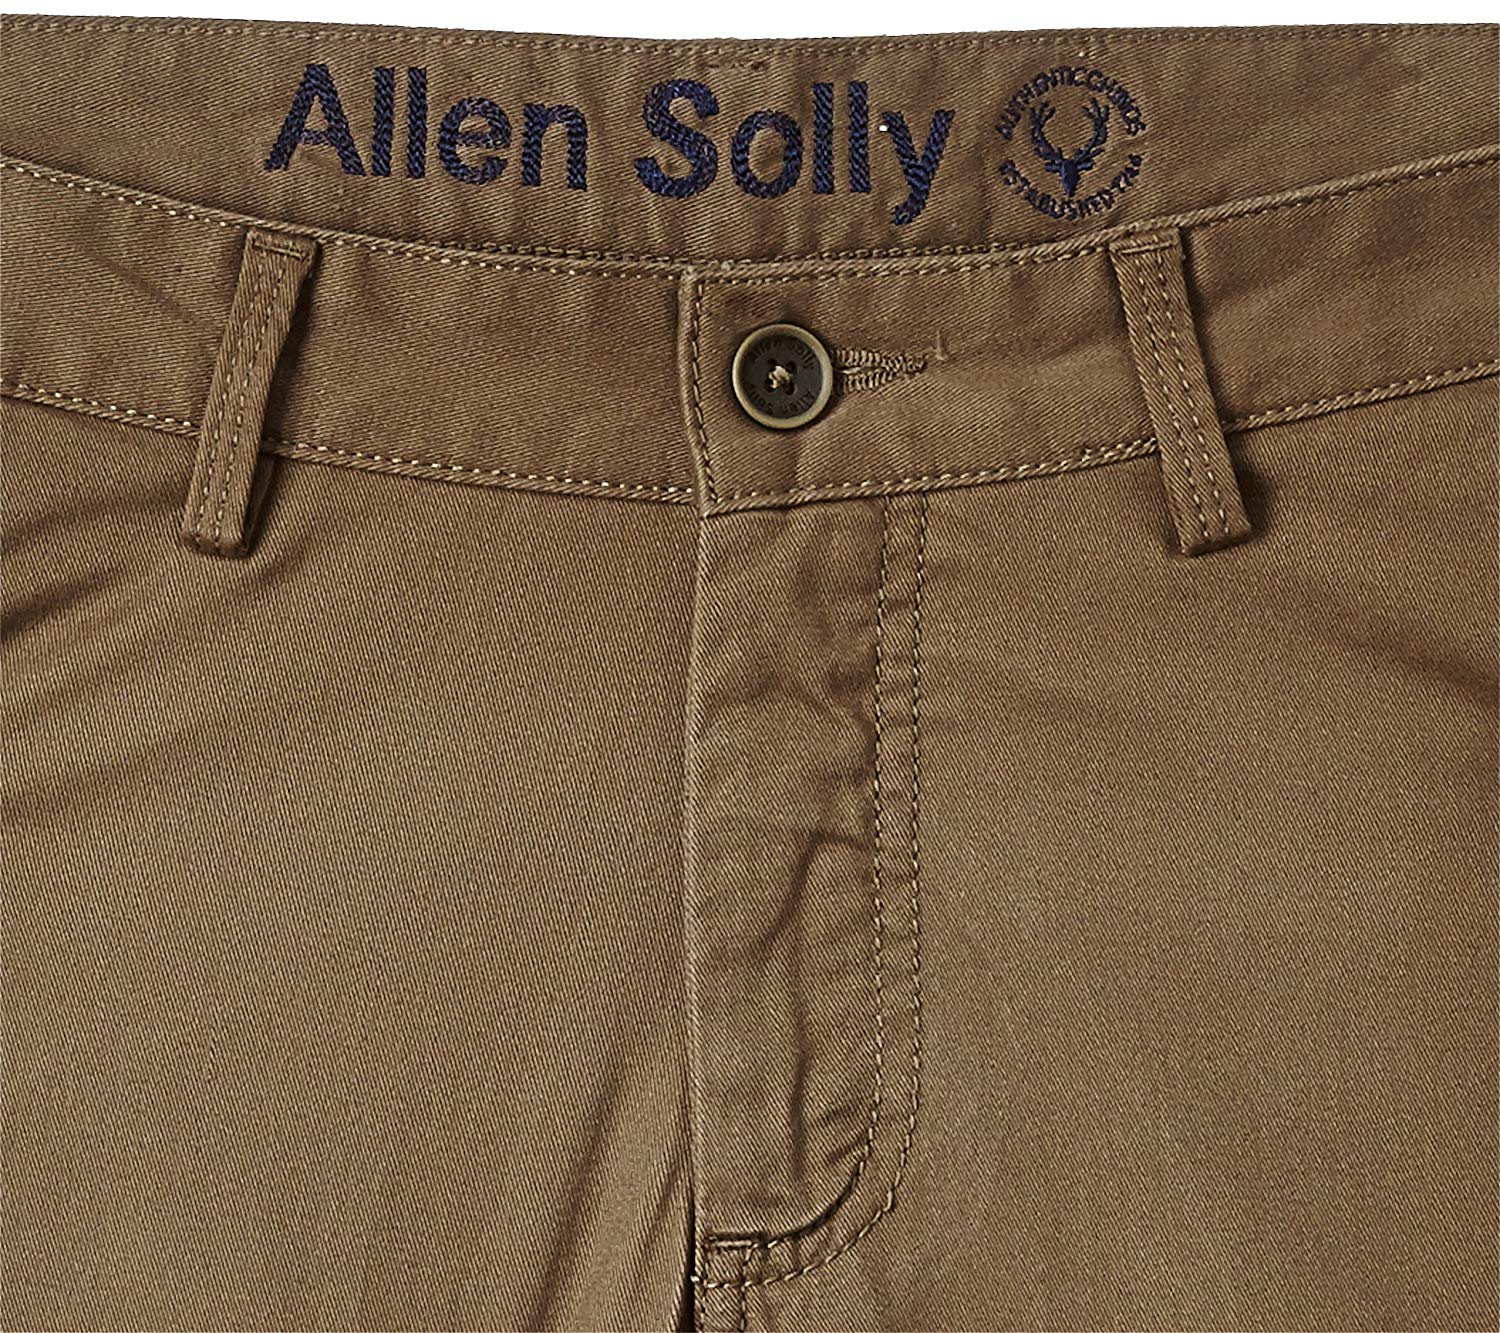 Shop Latest Allen Solly Collections Online In India